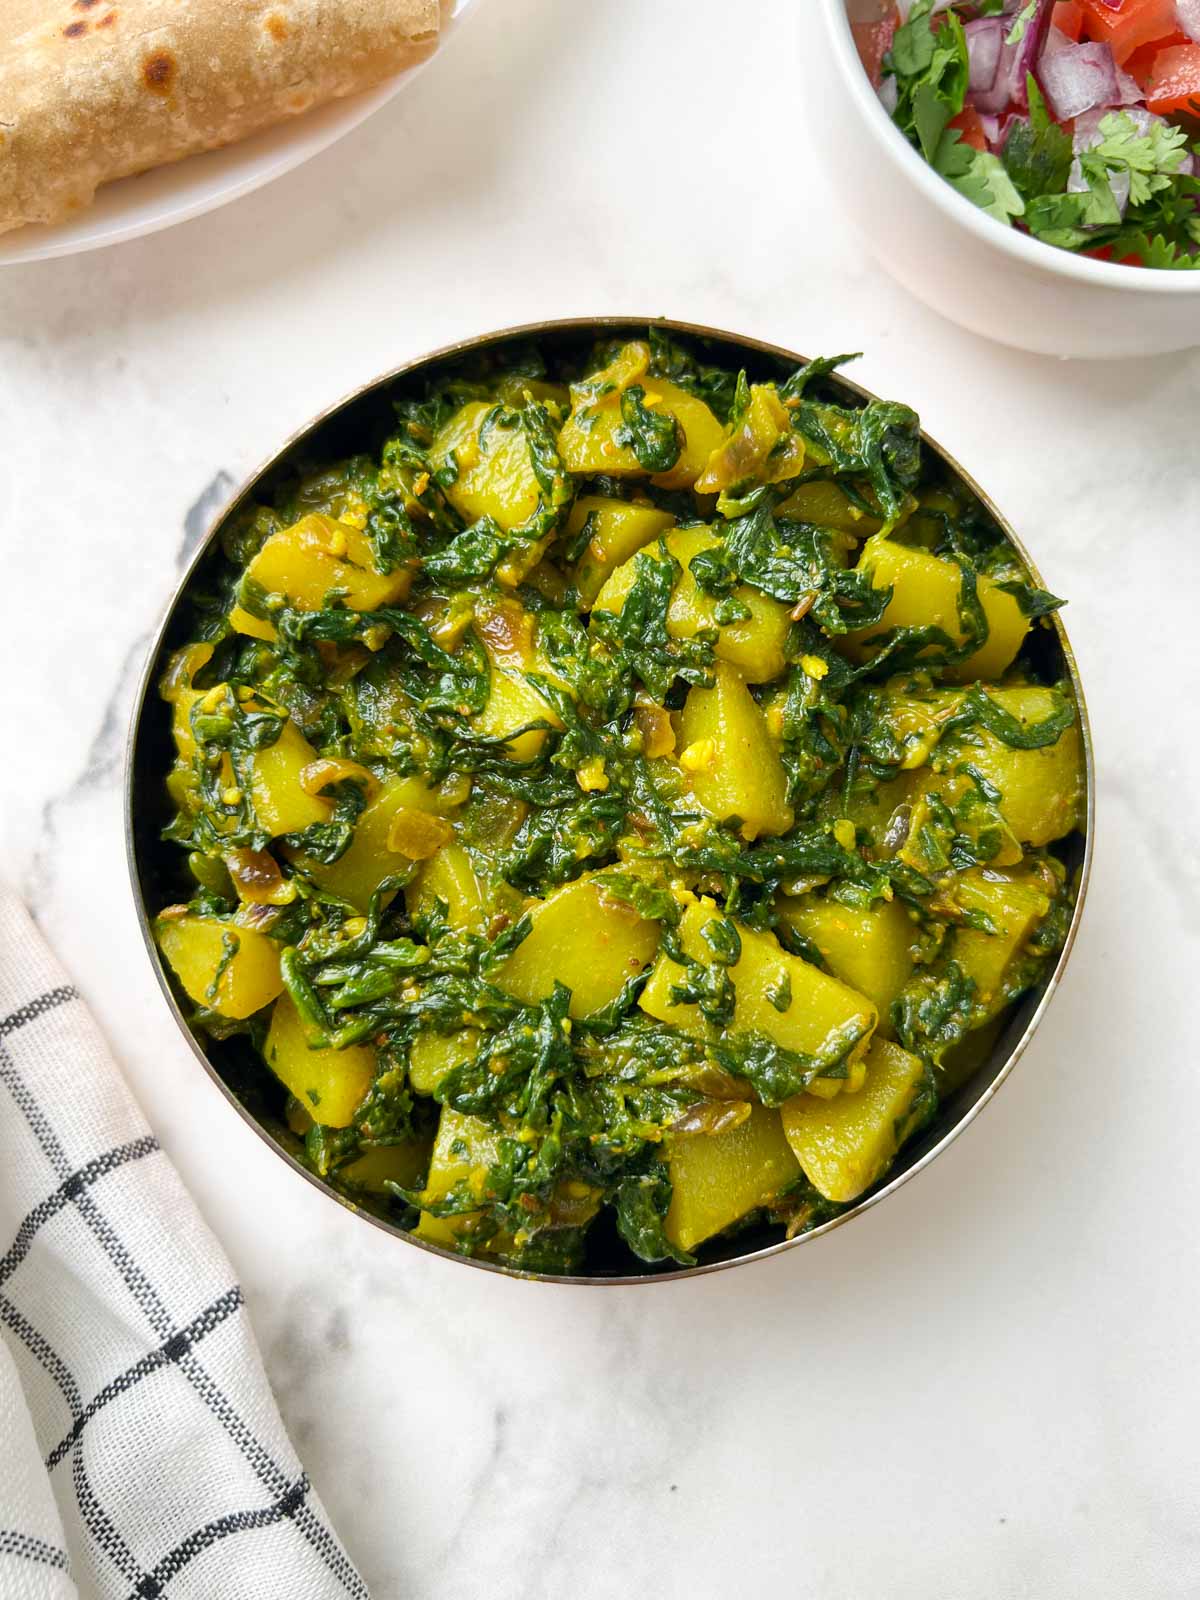 aloo palak served in a bowl with chapati and salad on the side